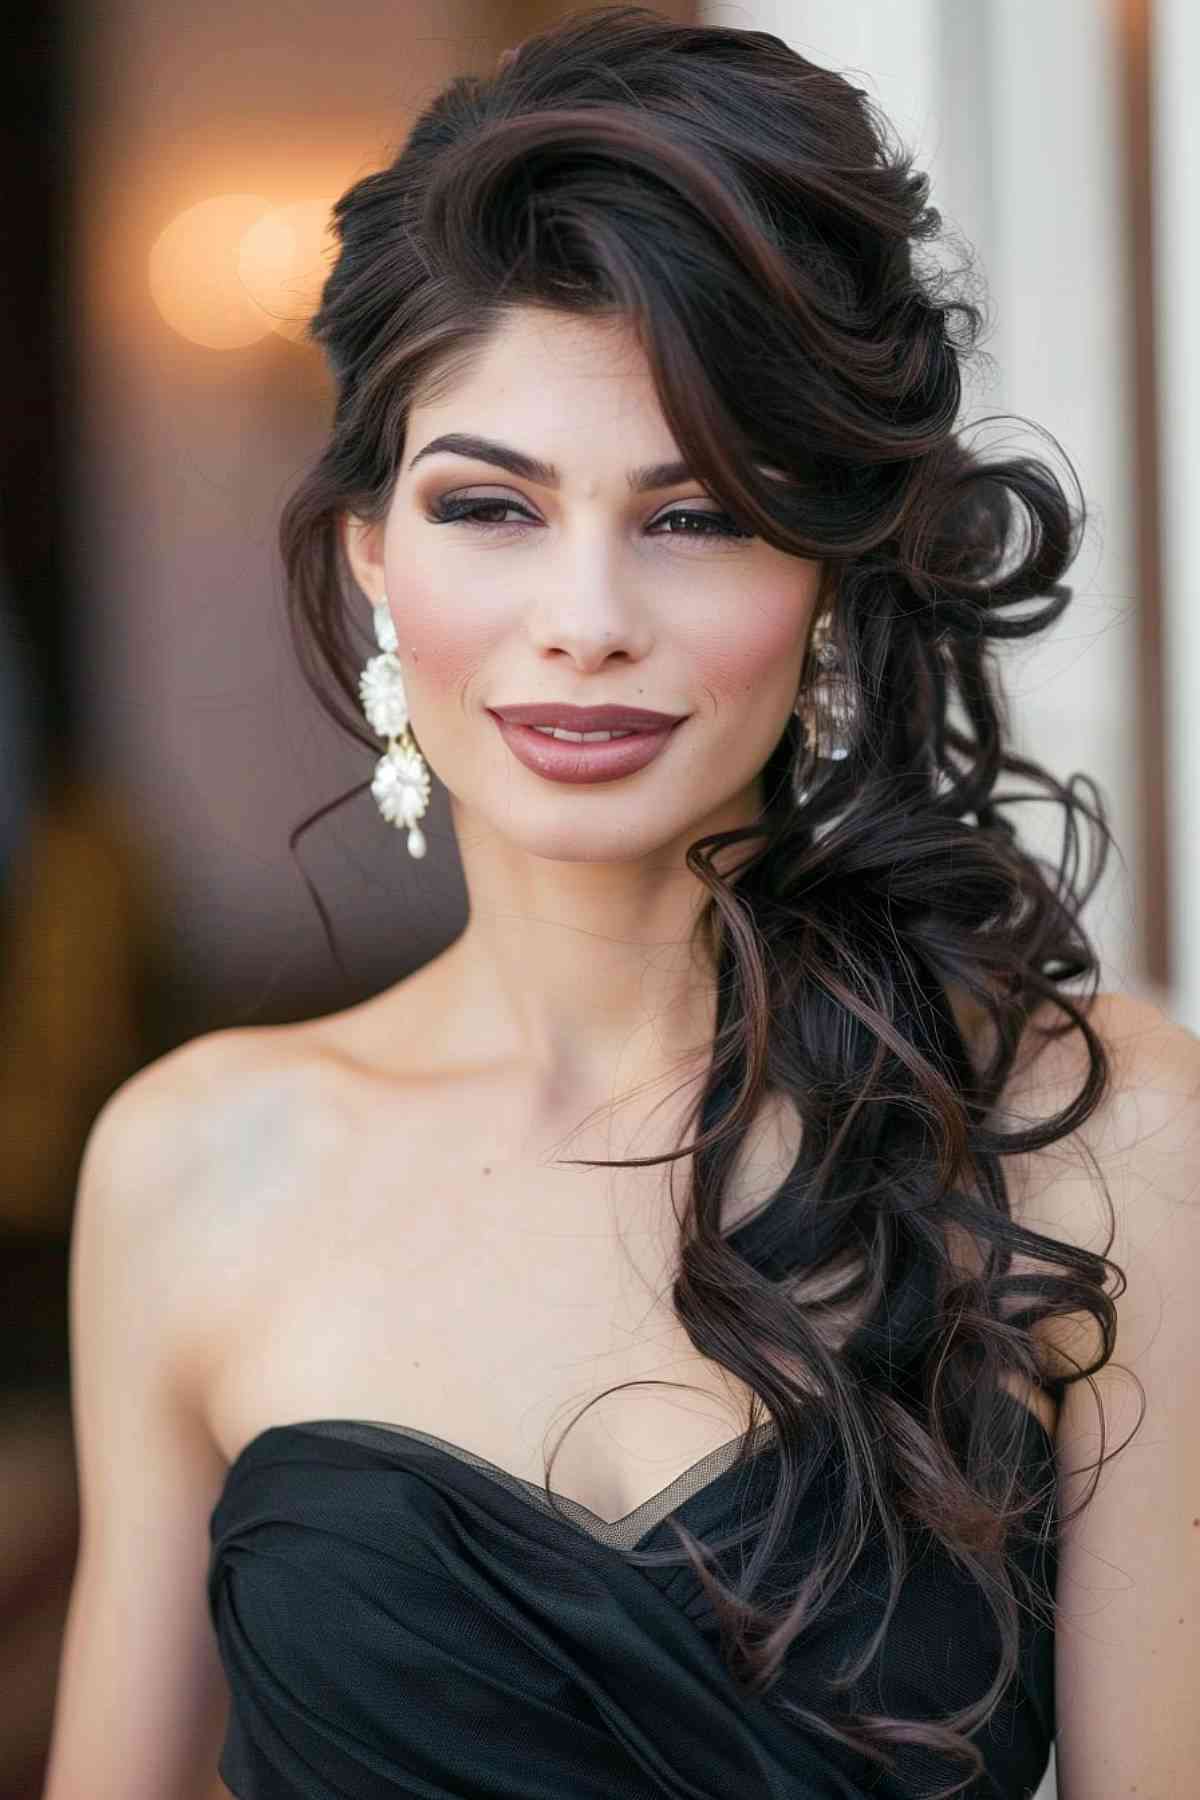 Elegant half-up, half-down hairstyle with waves for a chic gala evening